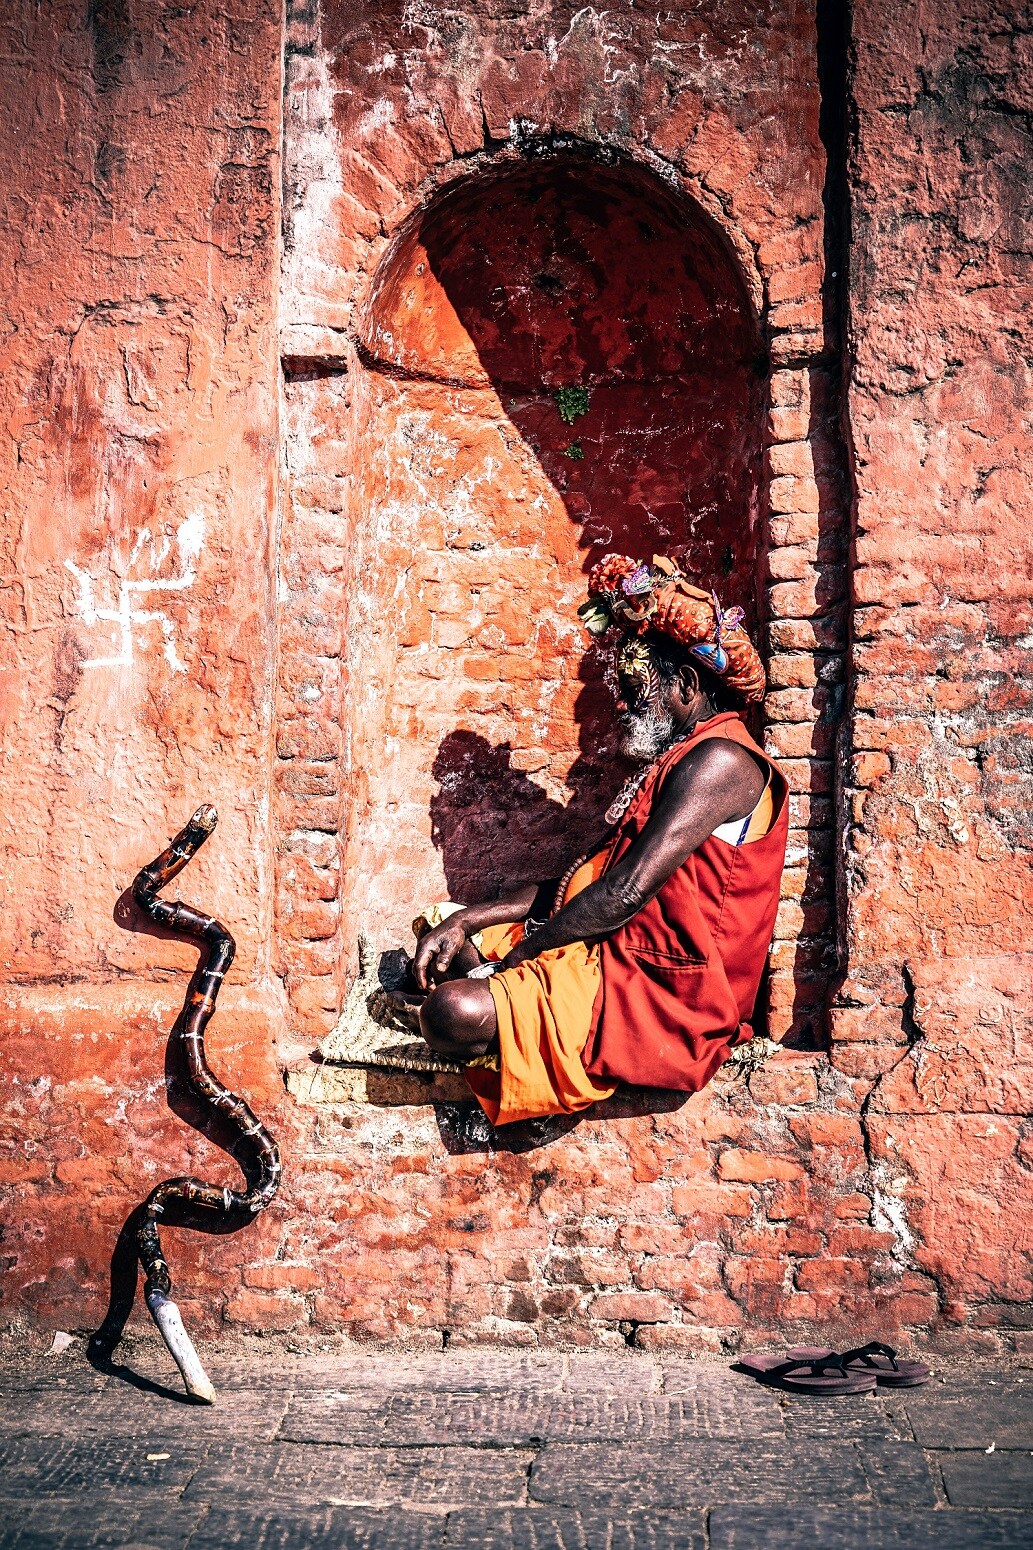 Land of Snake Charmers